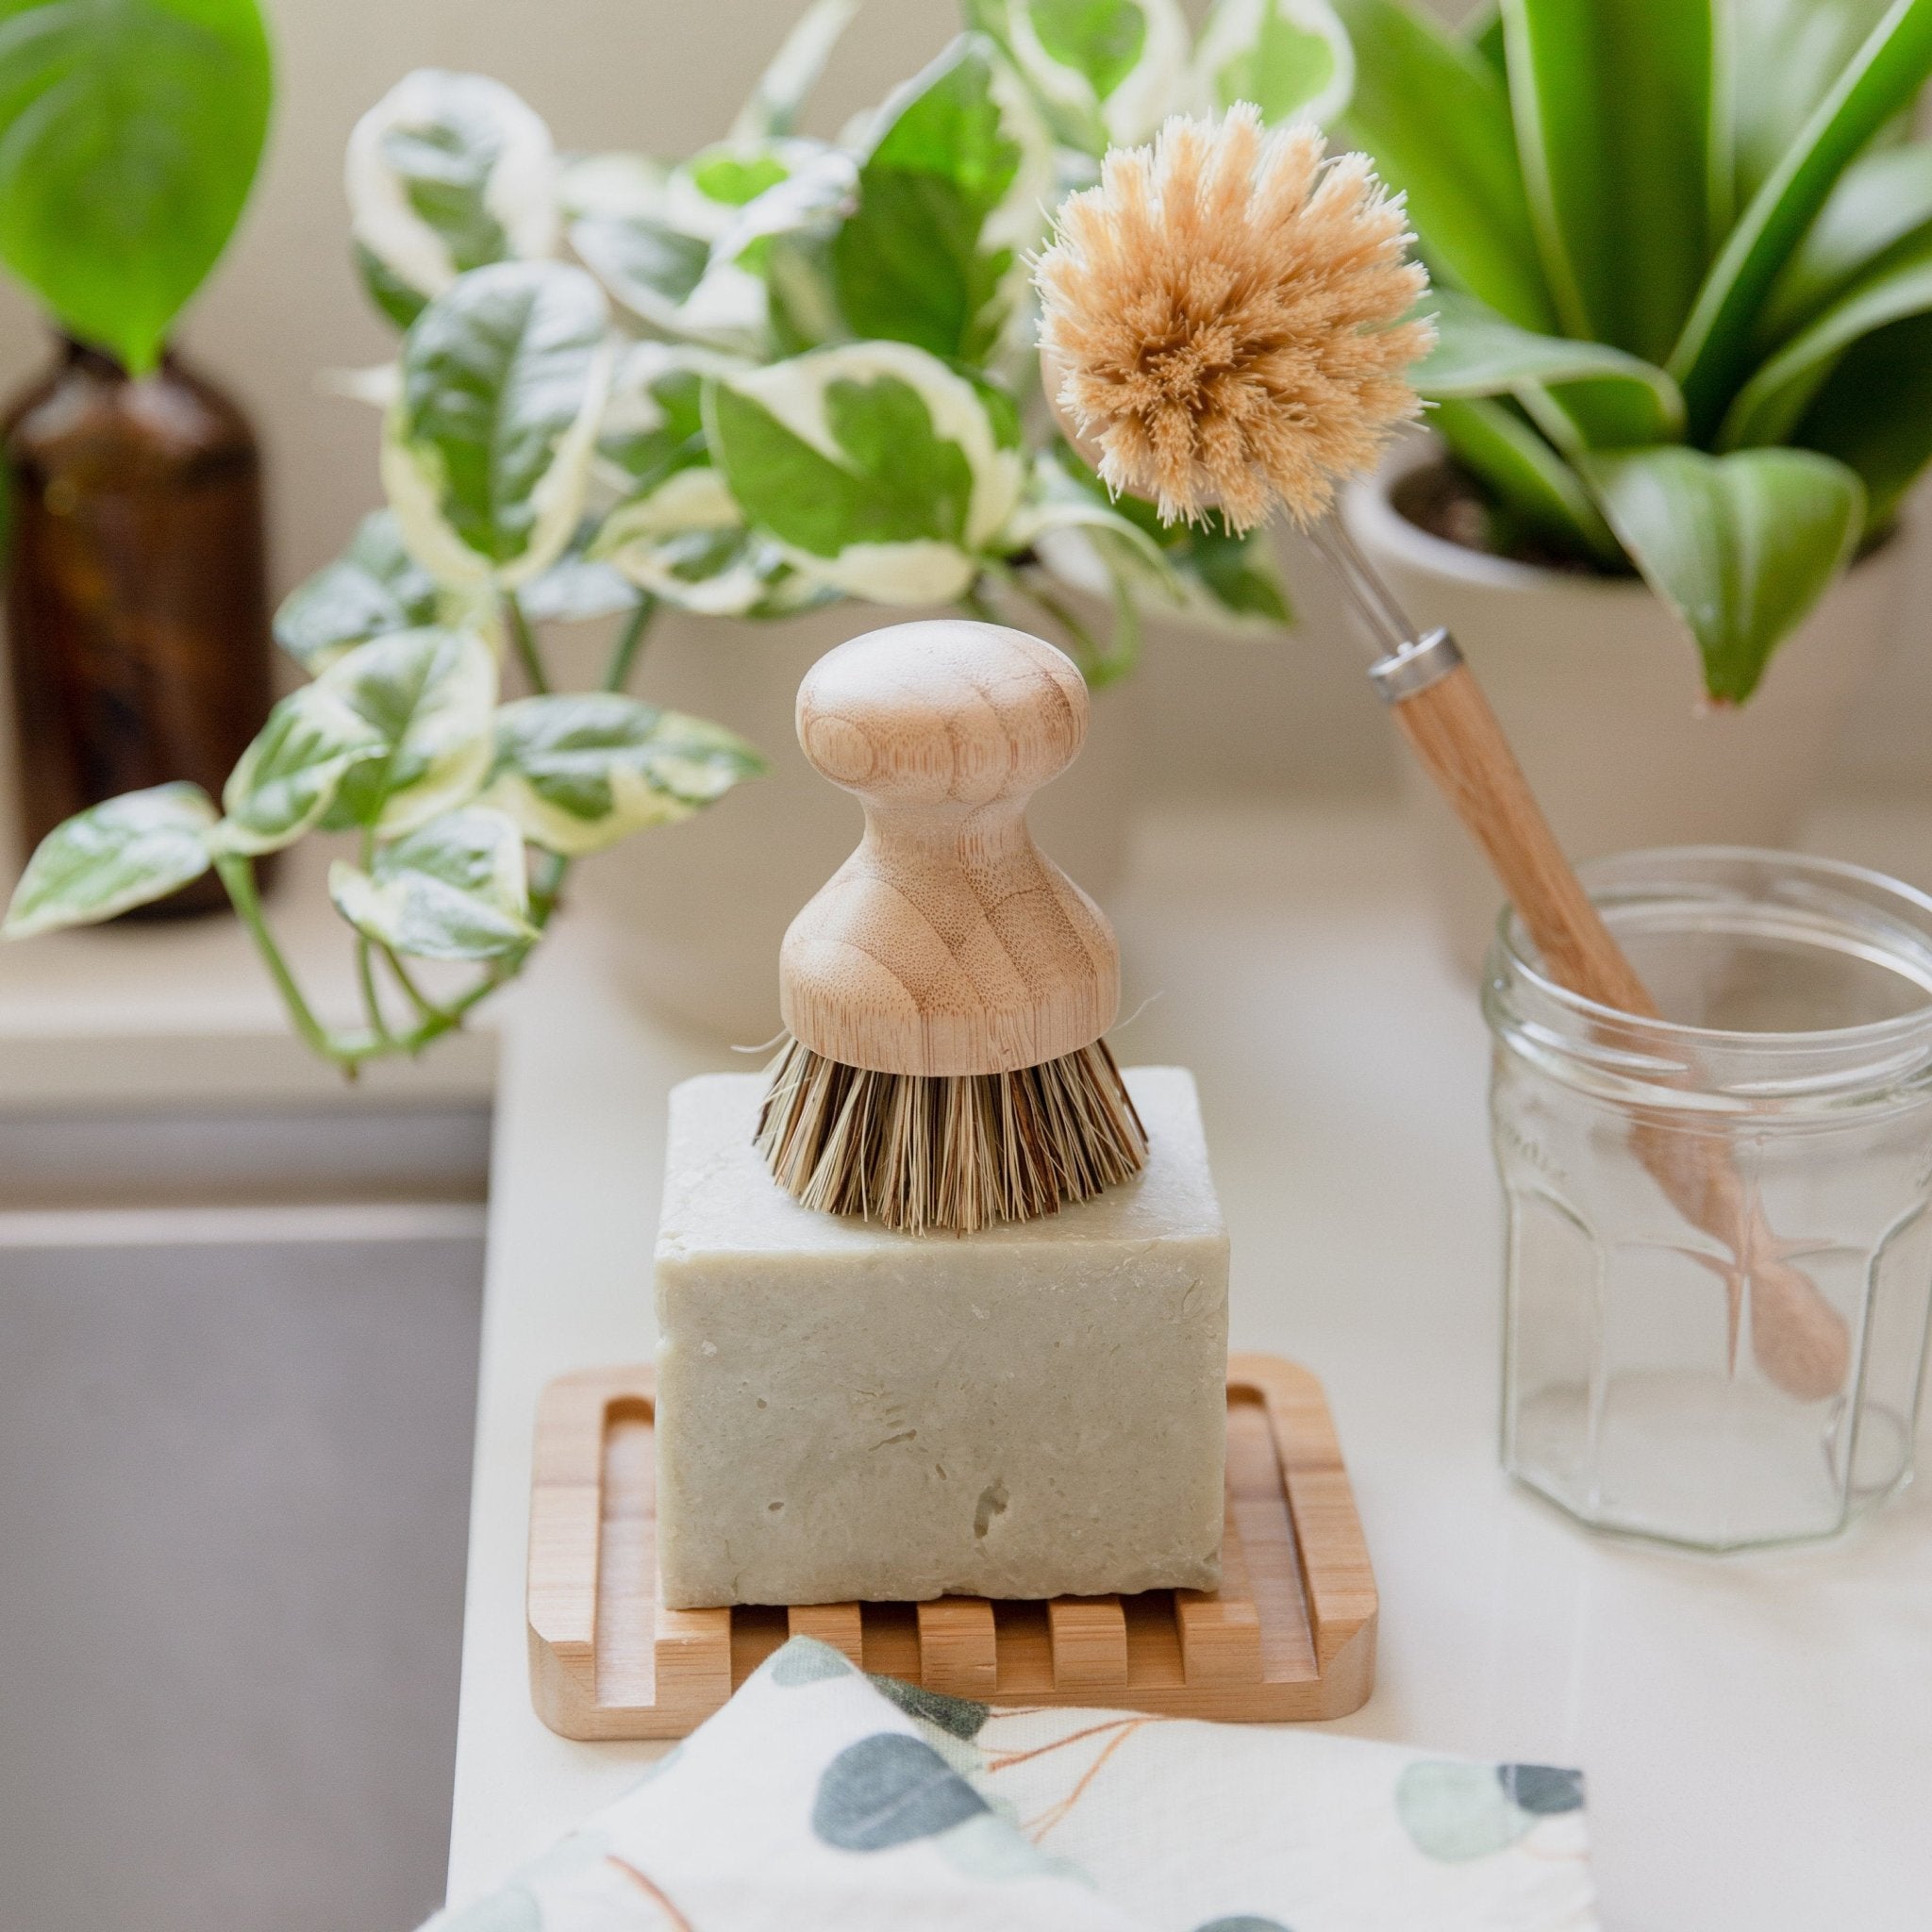 Sustainable Kitchen Bundle: Solid Dish Soap, Waterfall Soap Dish, Sisal Cleaning Brush, Pot Scrubber - Earth Ahead